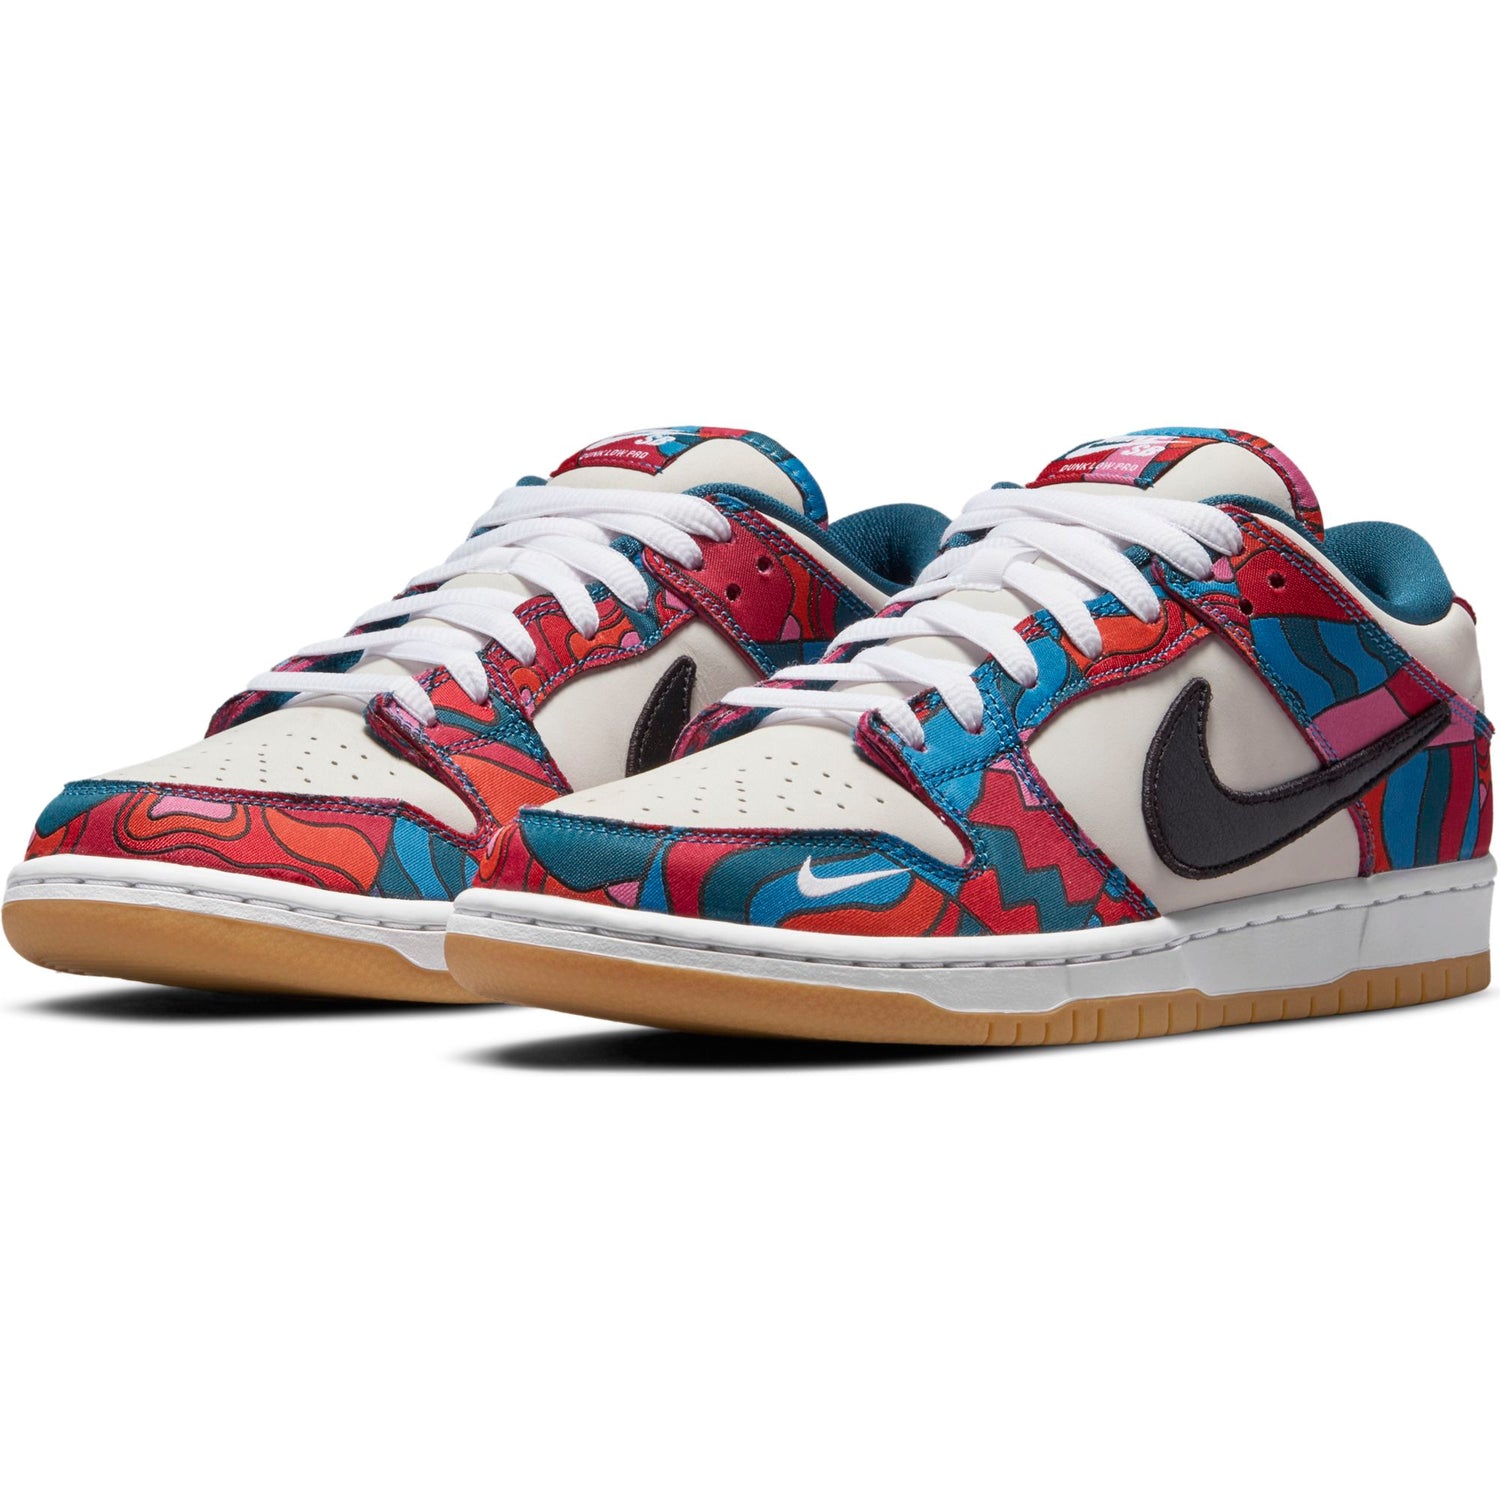 Nike SB Dunk Low by Parra 2021